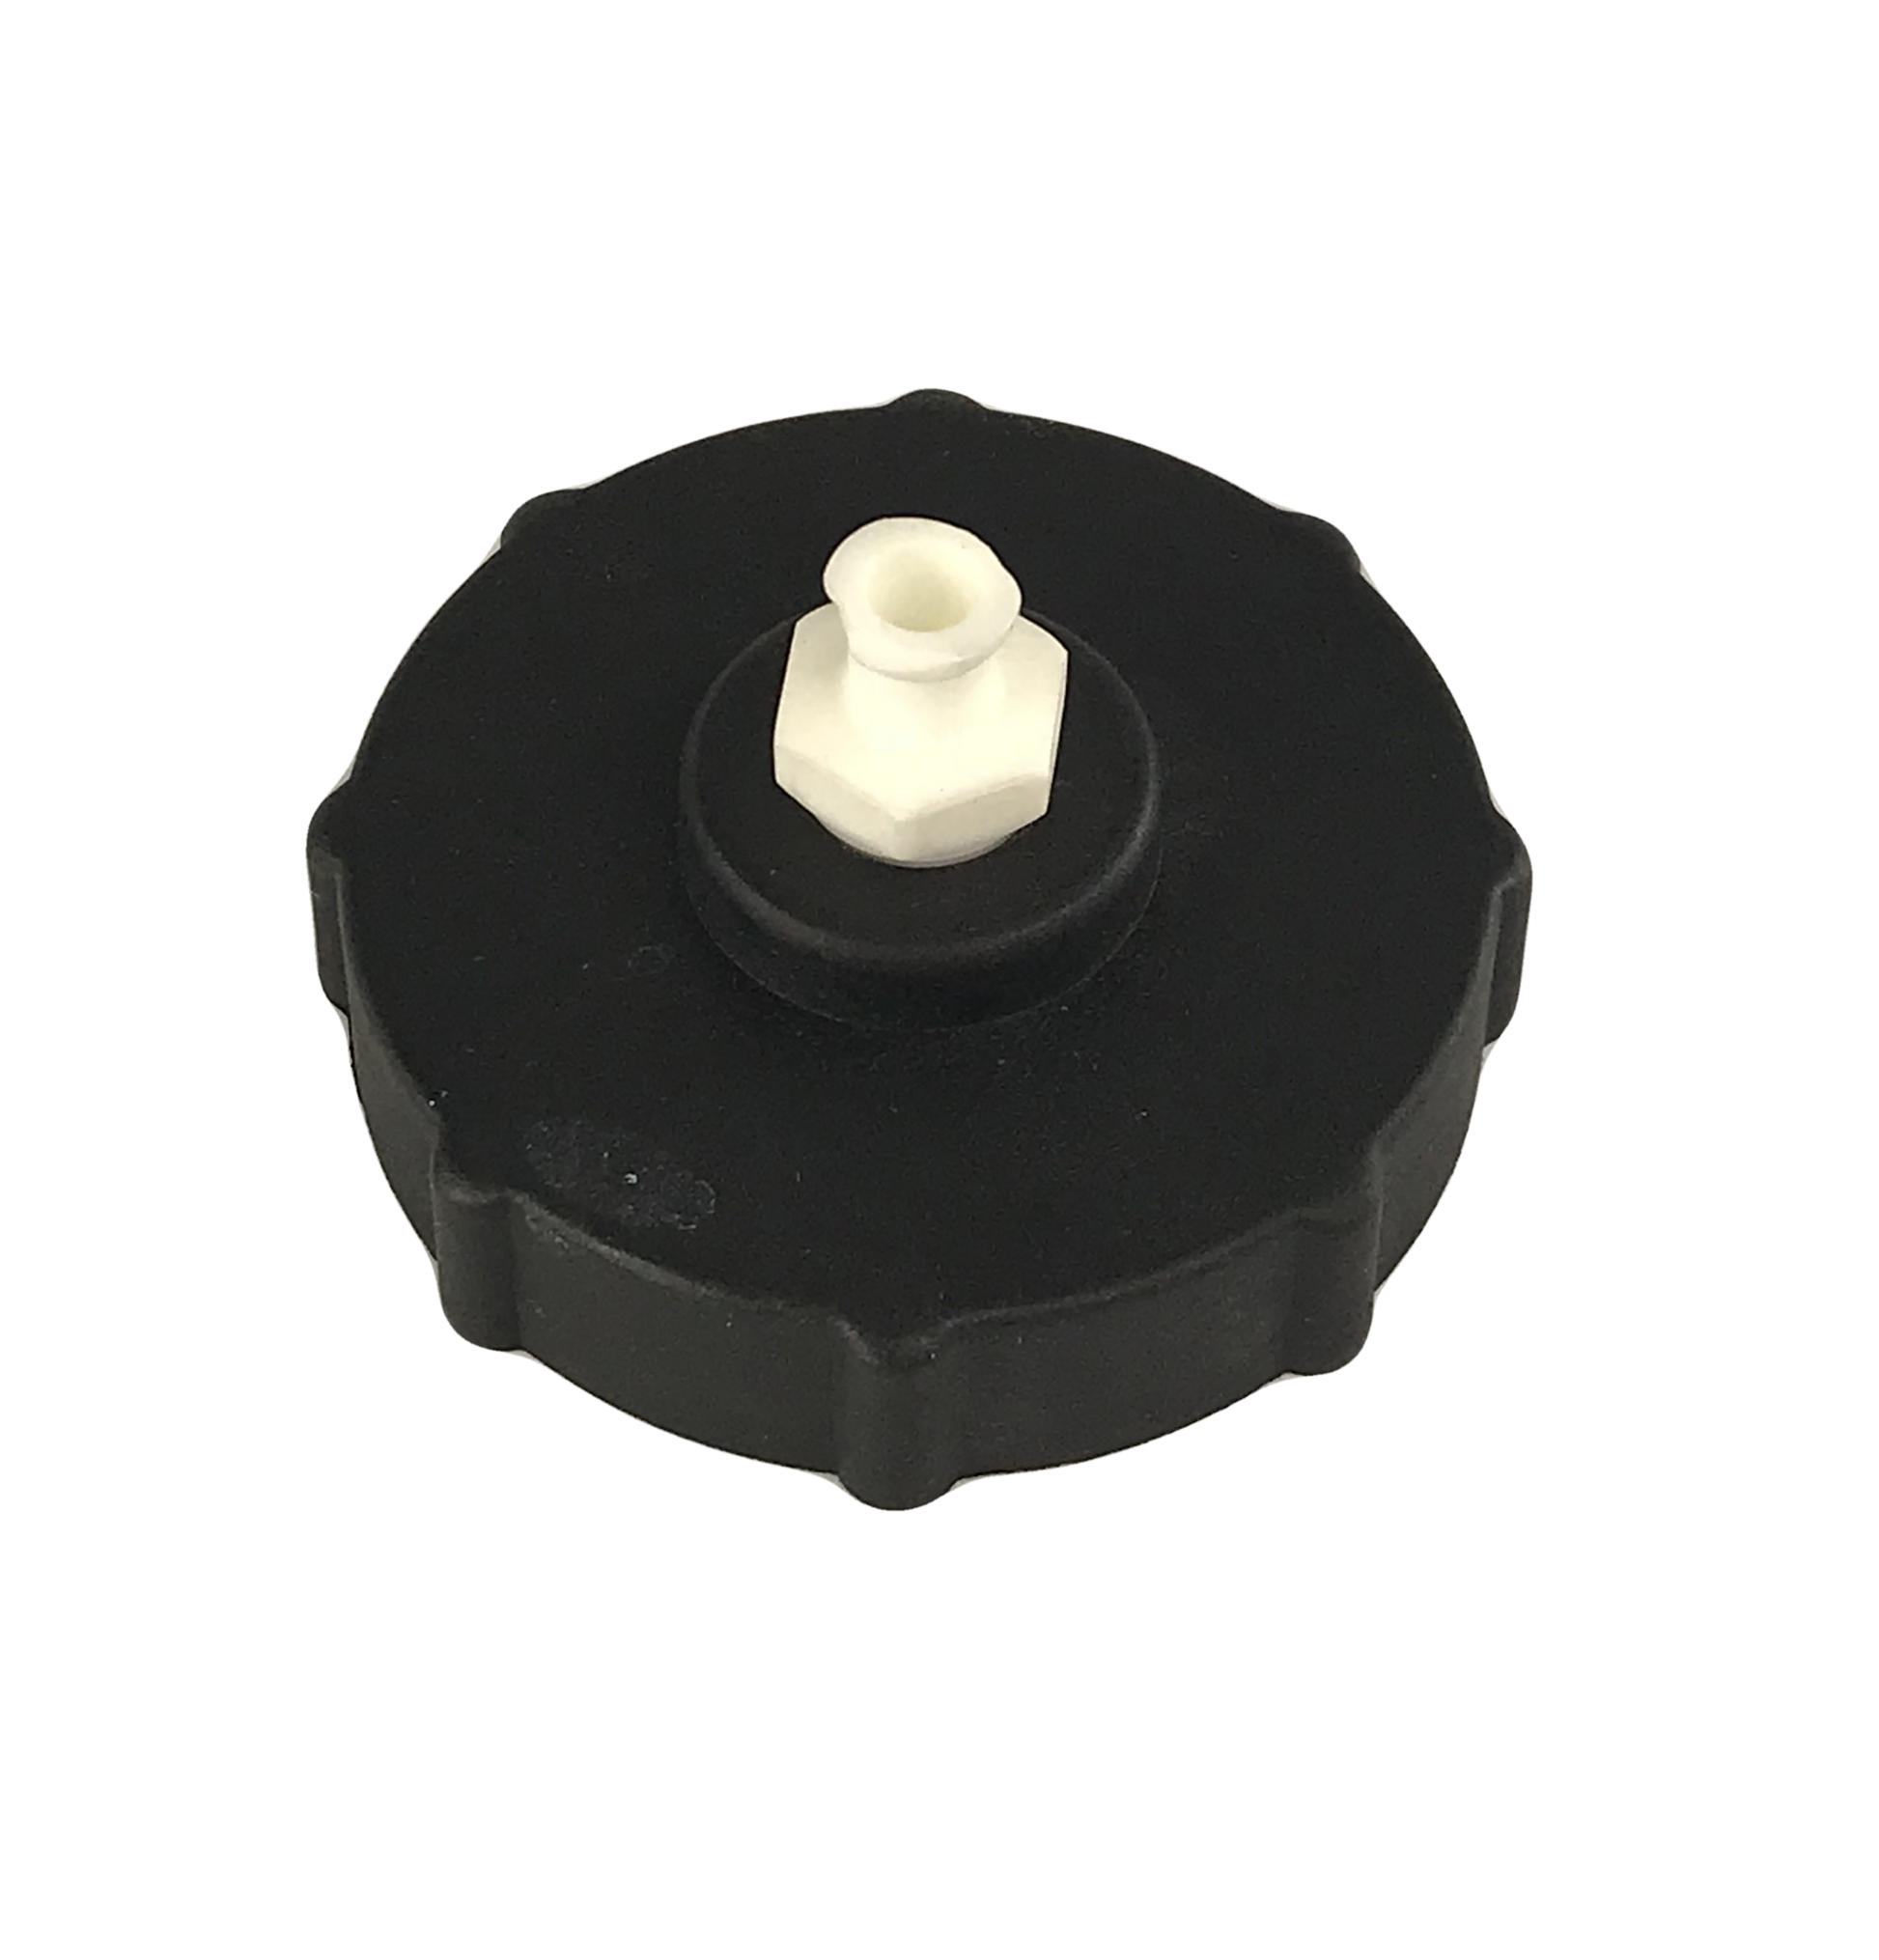 Black plastic BC-01 master cylinder cap with a white top. It is an individual cap adapter designed for Chrysler, Dodge, Jeep, and Plymouth master cylinder reservoirs. These are low-pressure adapters designed for 15-17 psi.